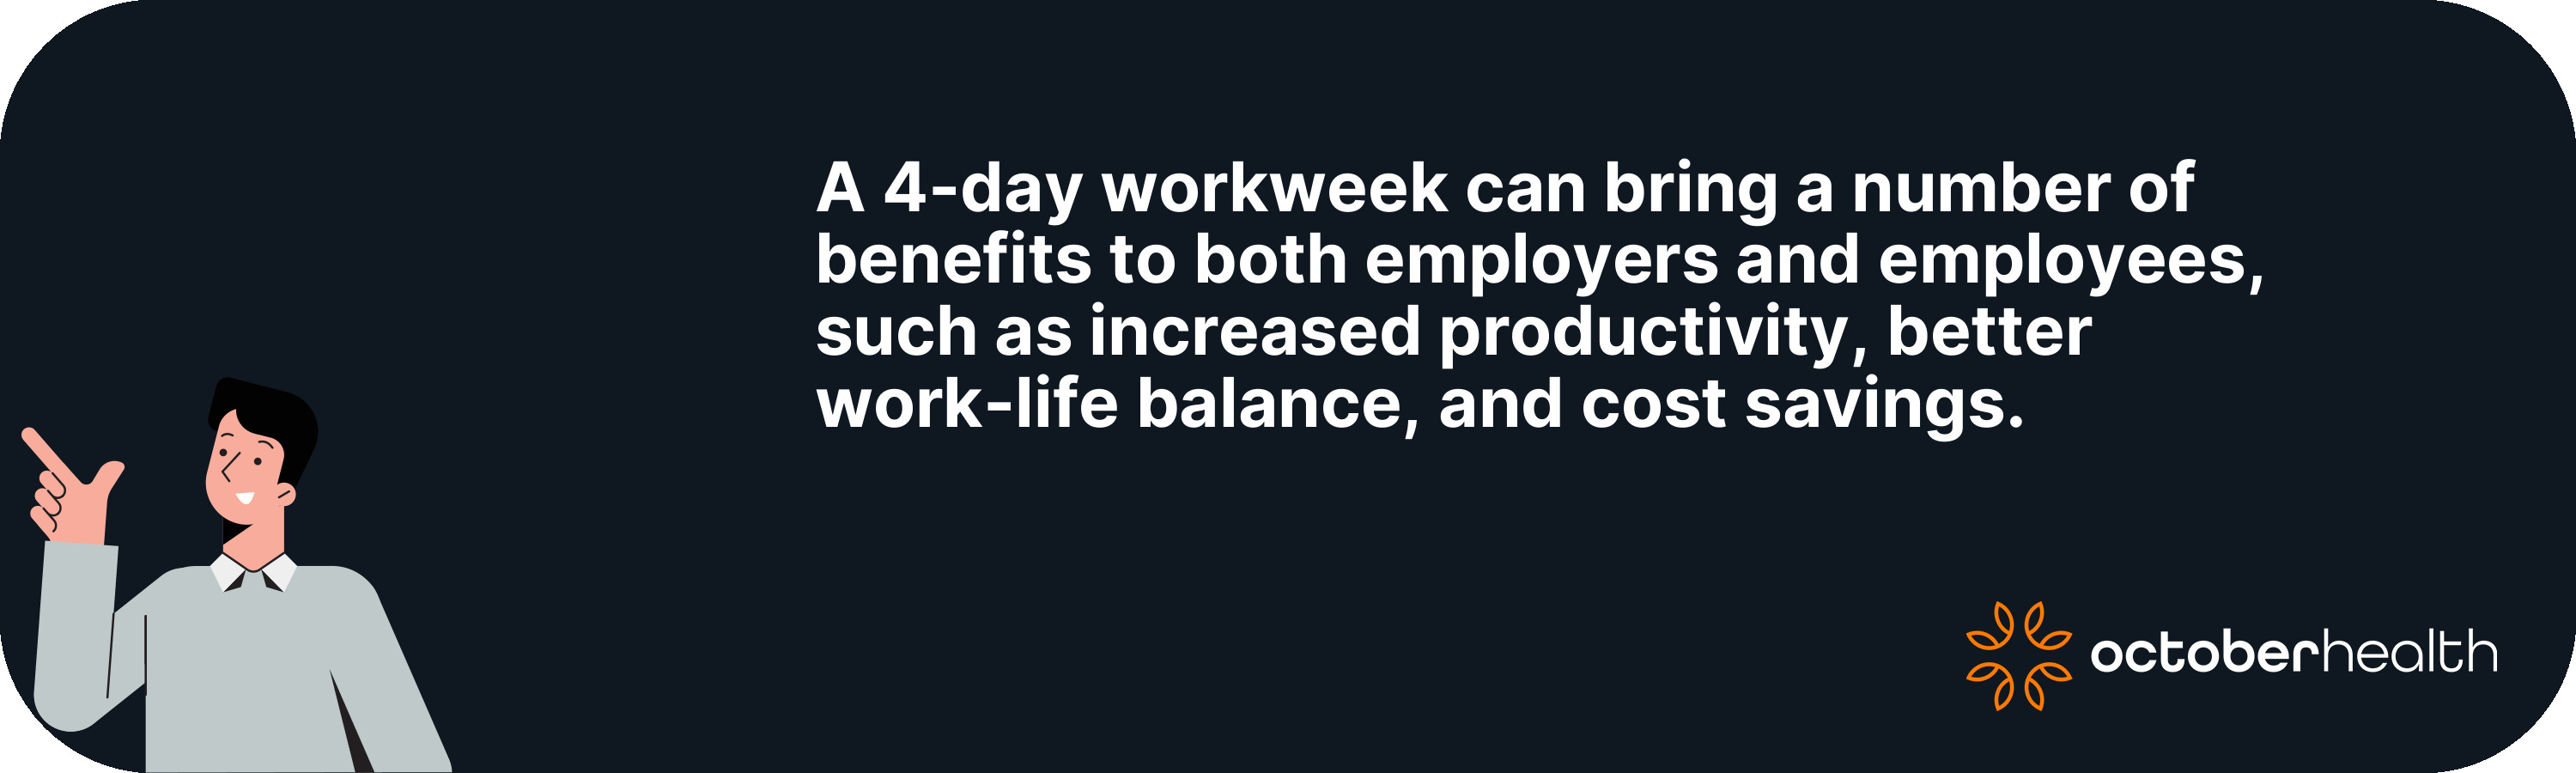 A 4-day workweek can bring a...